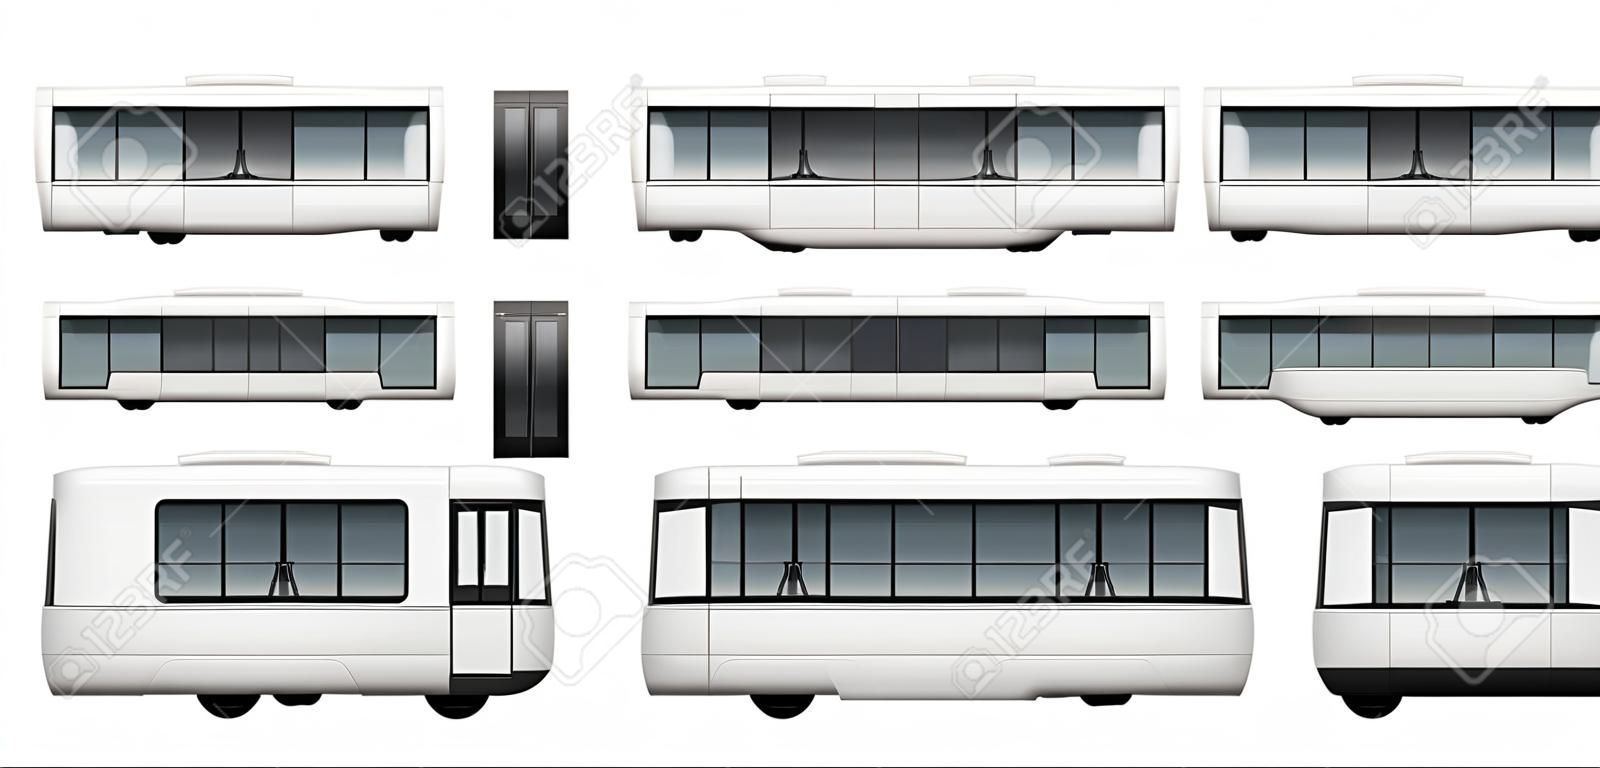 Vector tram train template for advertising, corporate identity. White tramway illustration. Vehicle branding mockup. Layers and groups well organized for easy editing and recolor.